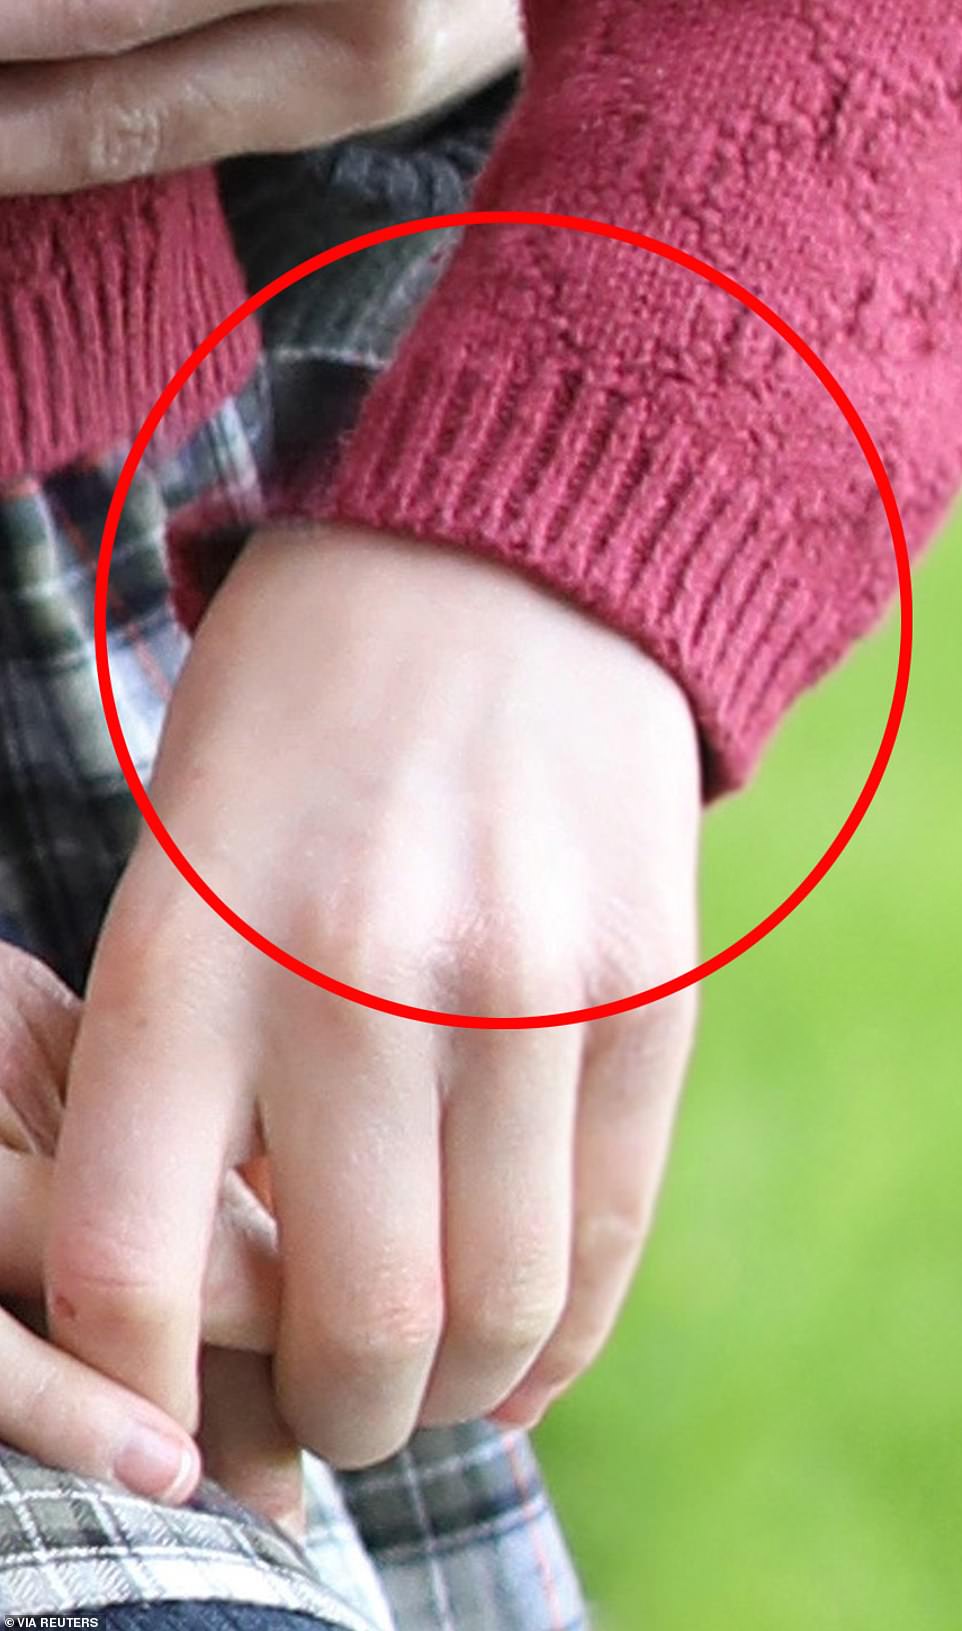 It appears Charlotte's hand was copied over from another picture as there is an empty space where her sleeve should be